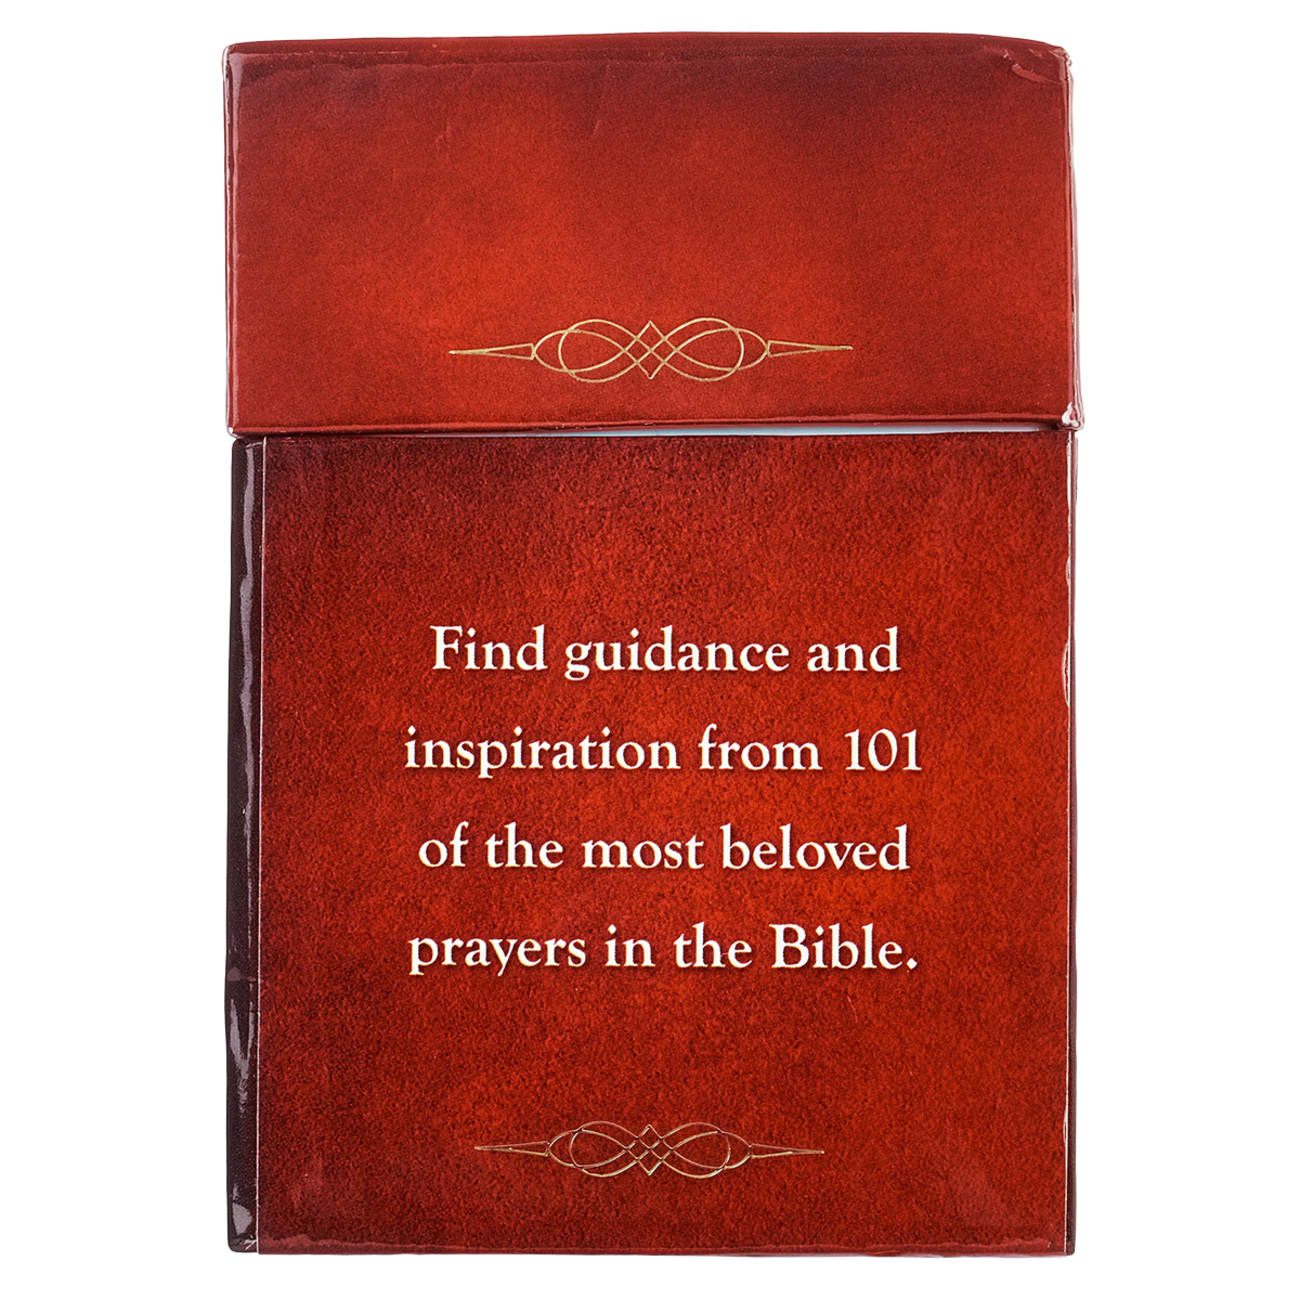 Box of Blessings: 101 Best Loved Bible Prayers Stationery